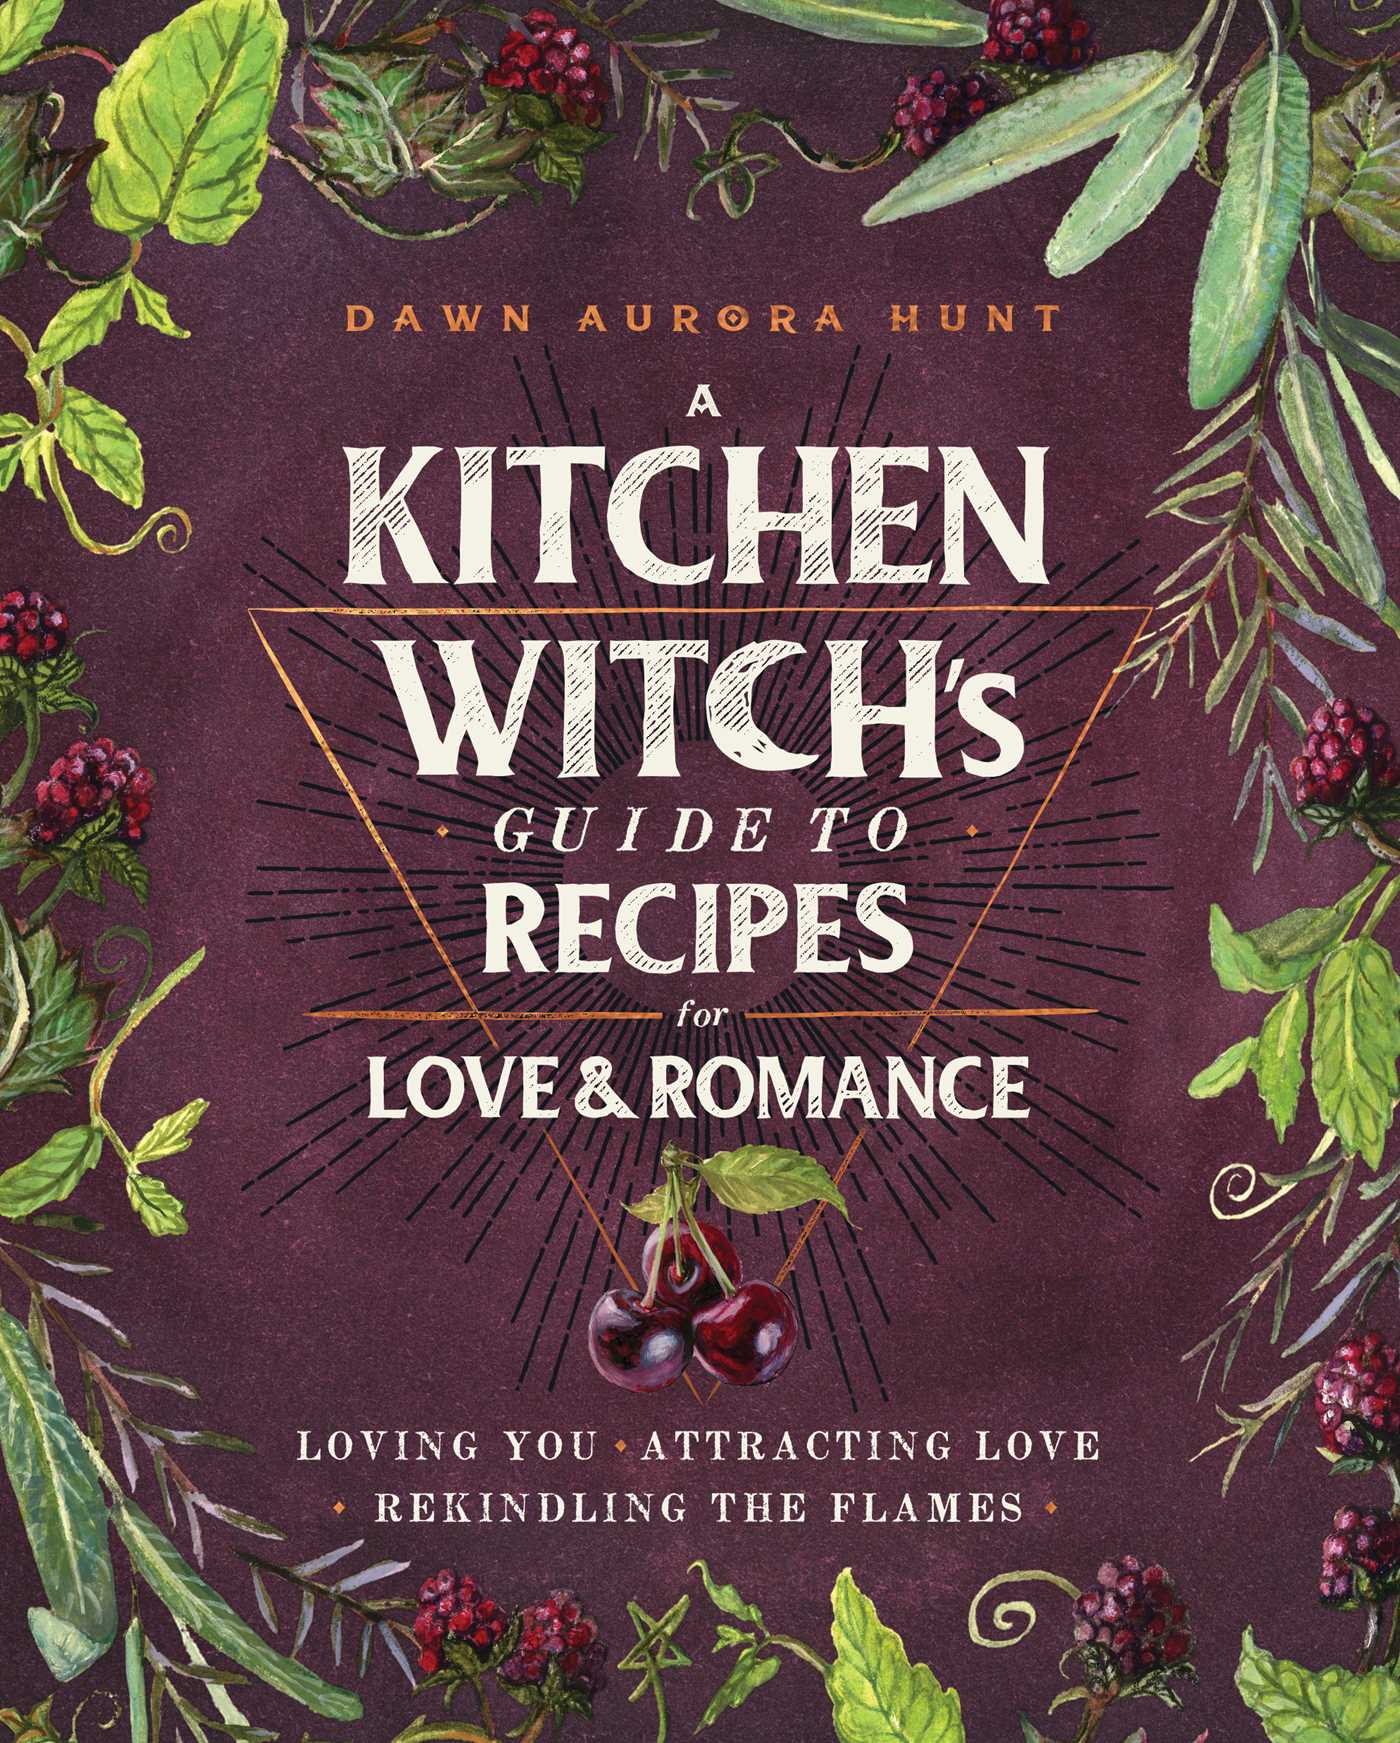 A Kitchen Witch's Guide to Recipes for Love & Romance : Loving You * Attracting Love * Rekindling the Flames (A Cookbook)